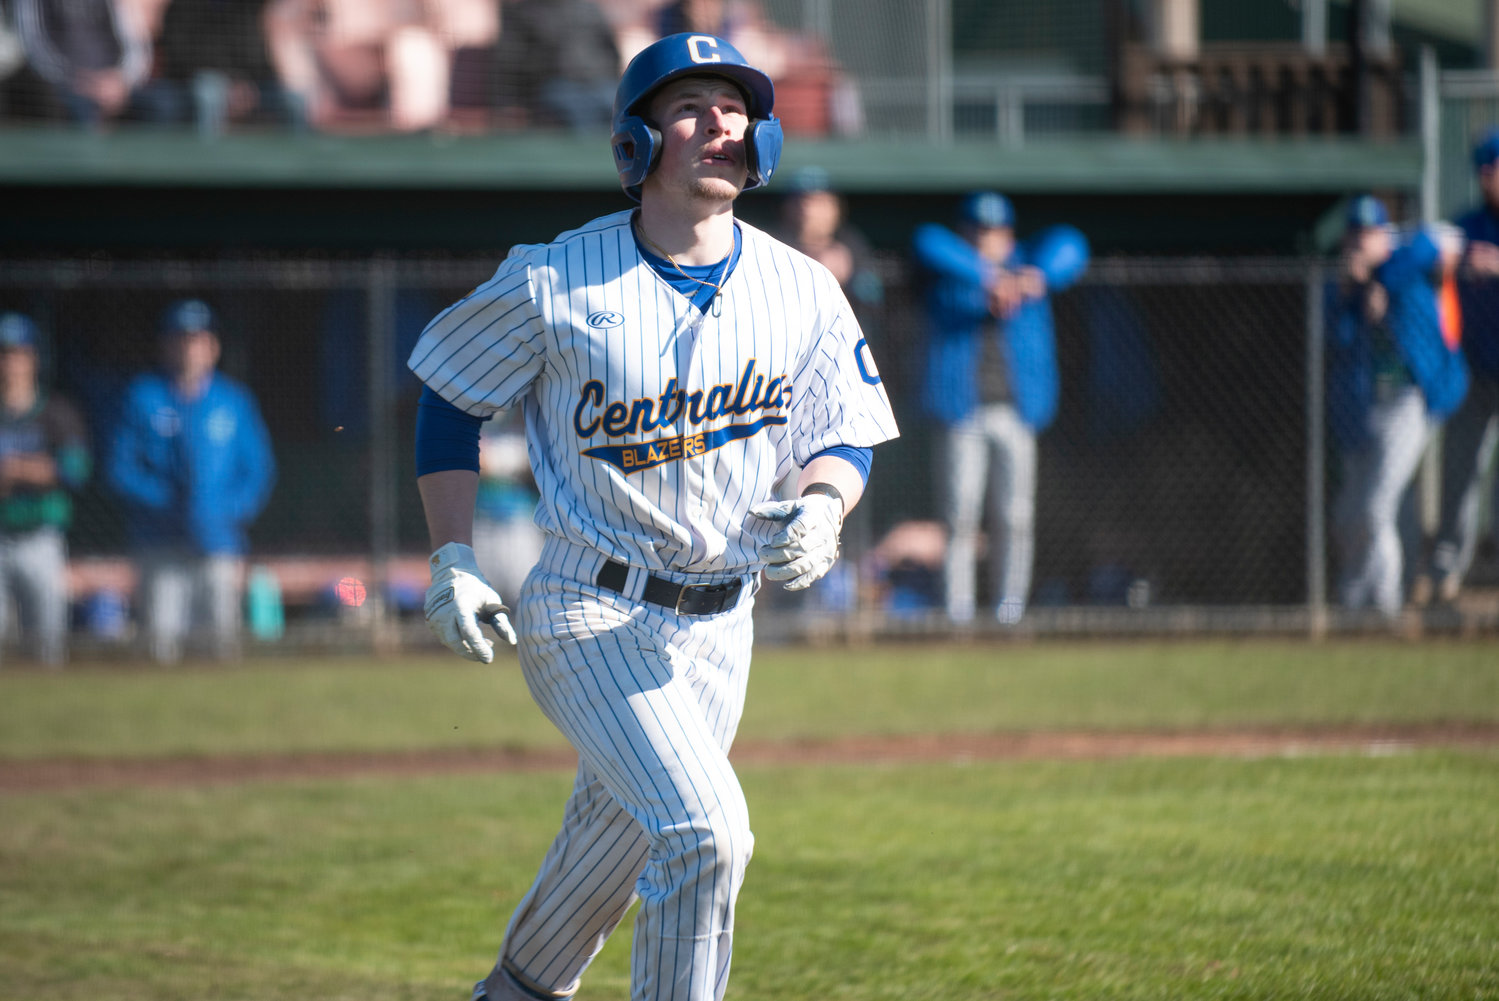 Centralia College's Jaymz Knowlton watches his foul ball fly off during a home game against Edmonds on Feb. 25 at Wheeler Field.